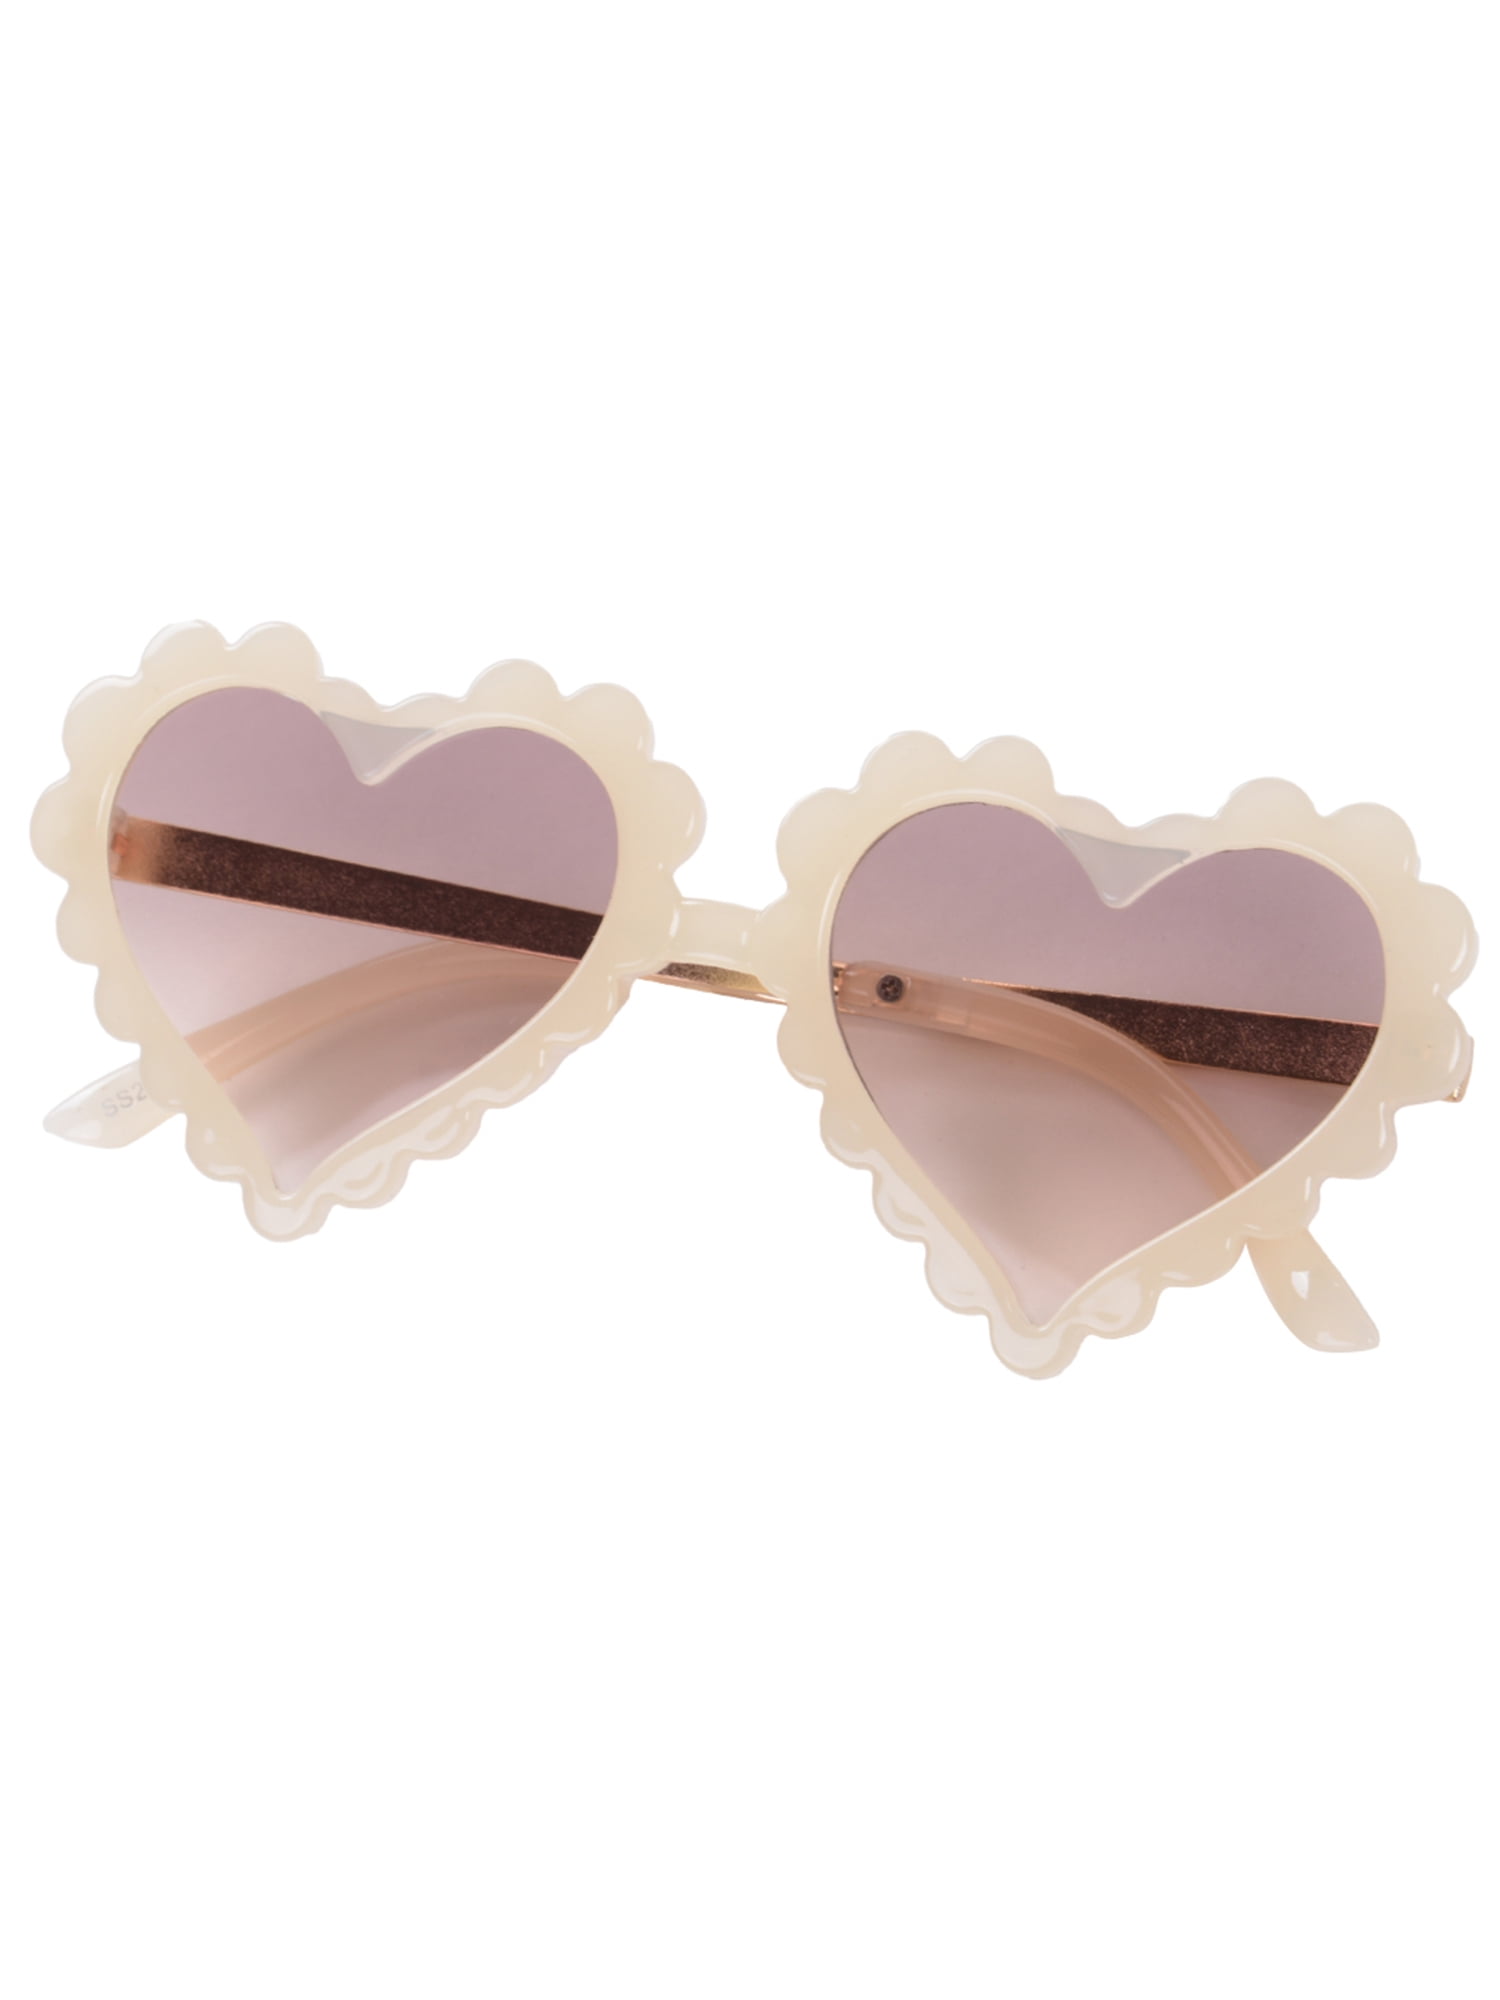 Eyewear Glasses for Party Photography Outdoor Beach 1-16T Kids Toddler Baby Girl Boy Heart Shaped Anti-UV Sunglasses